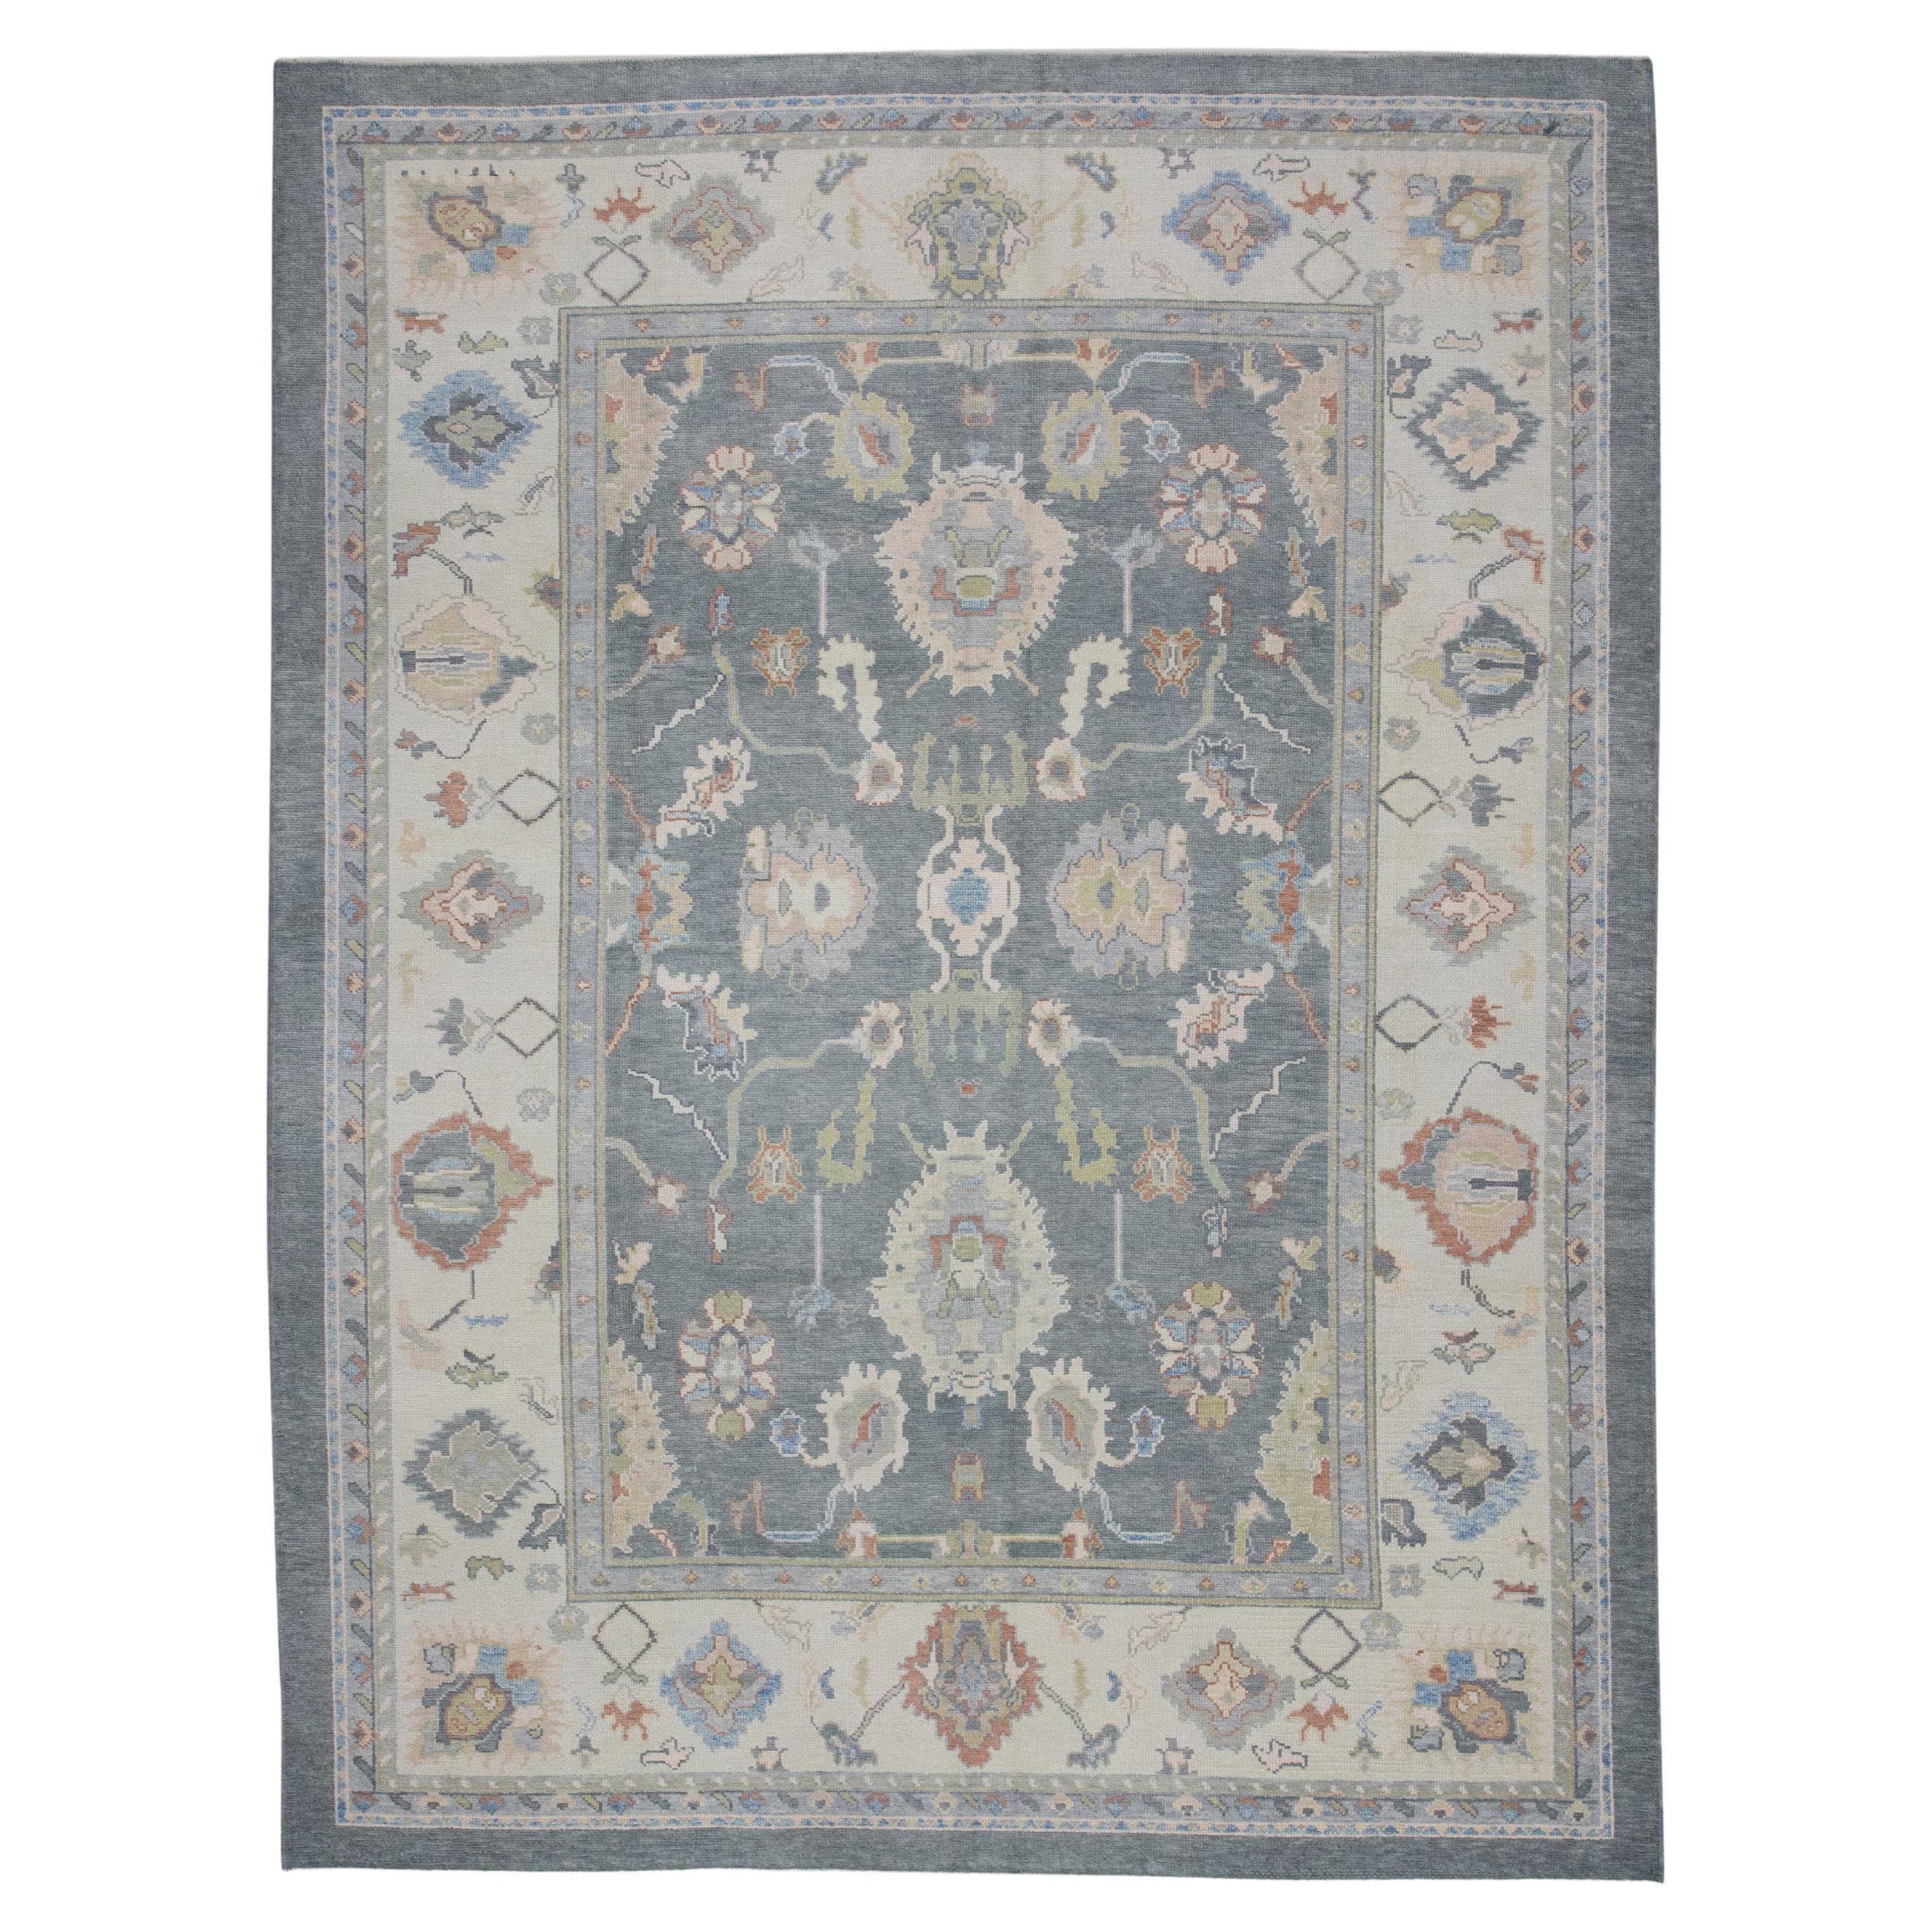 Gray Colorful Floral Design Handwoven Wool Turkish Oushak Rug 8'11" X 11'8"